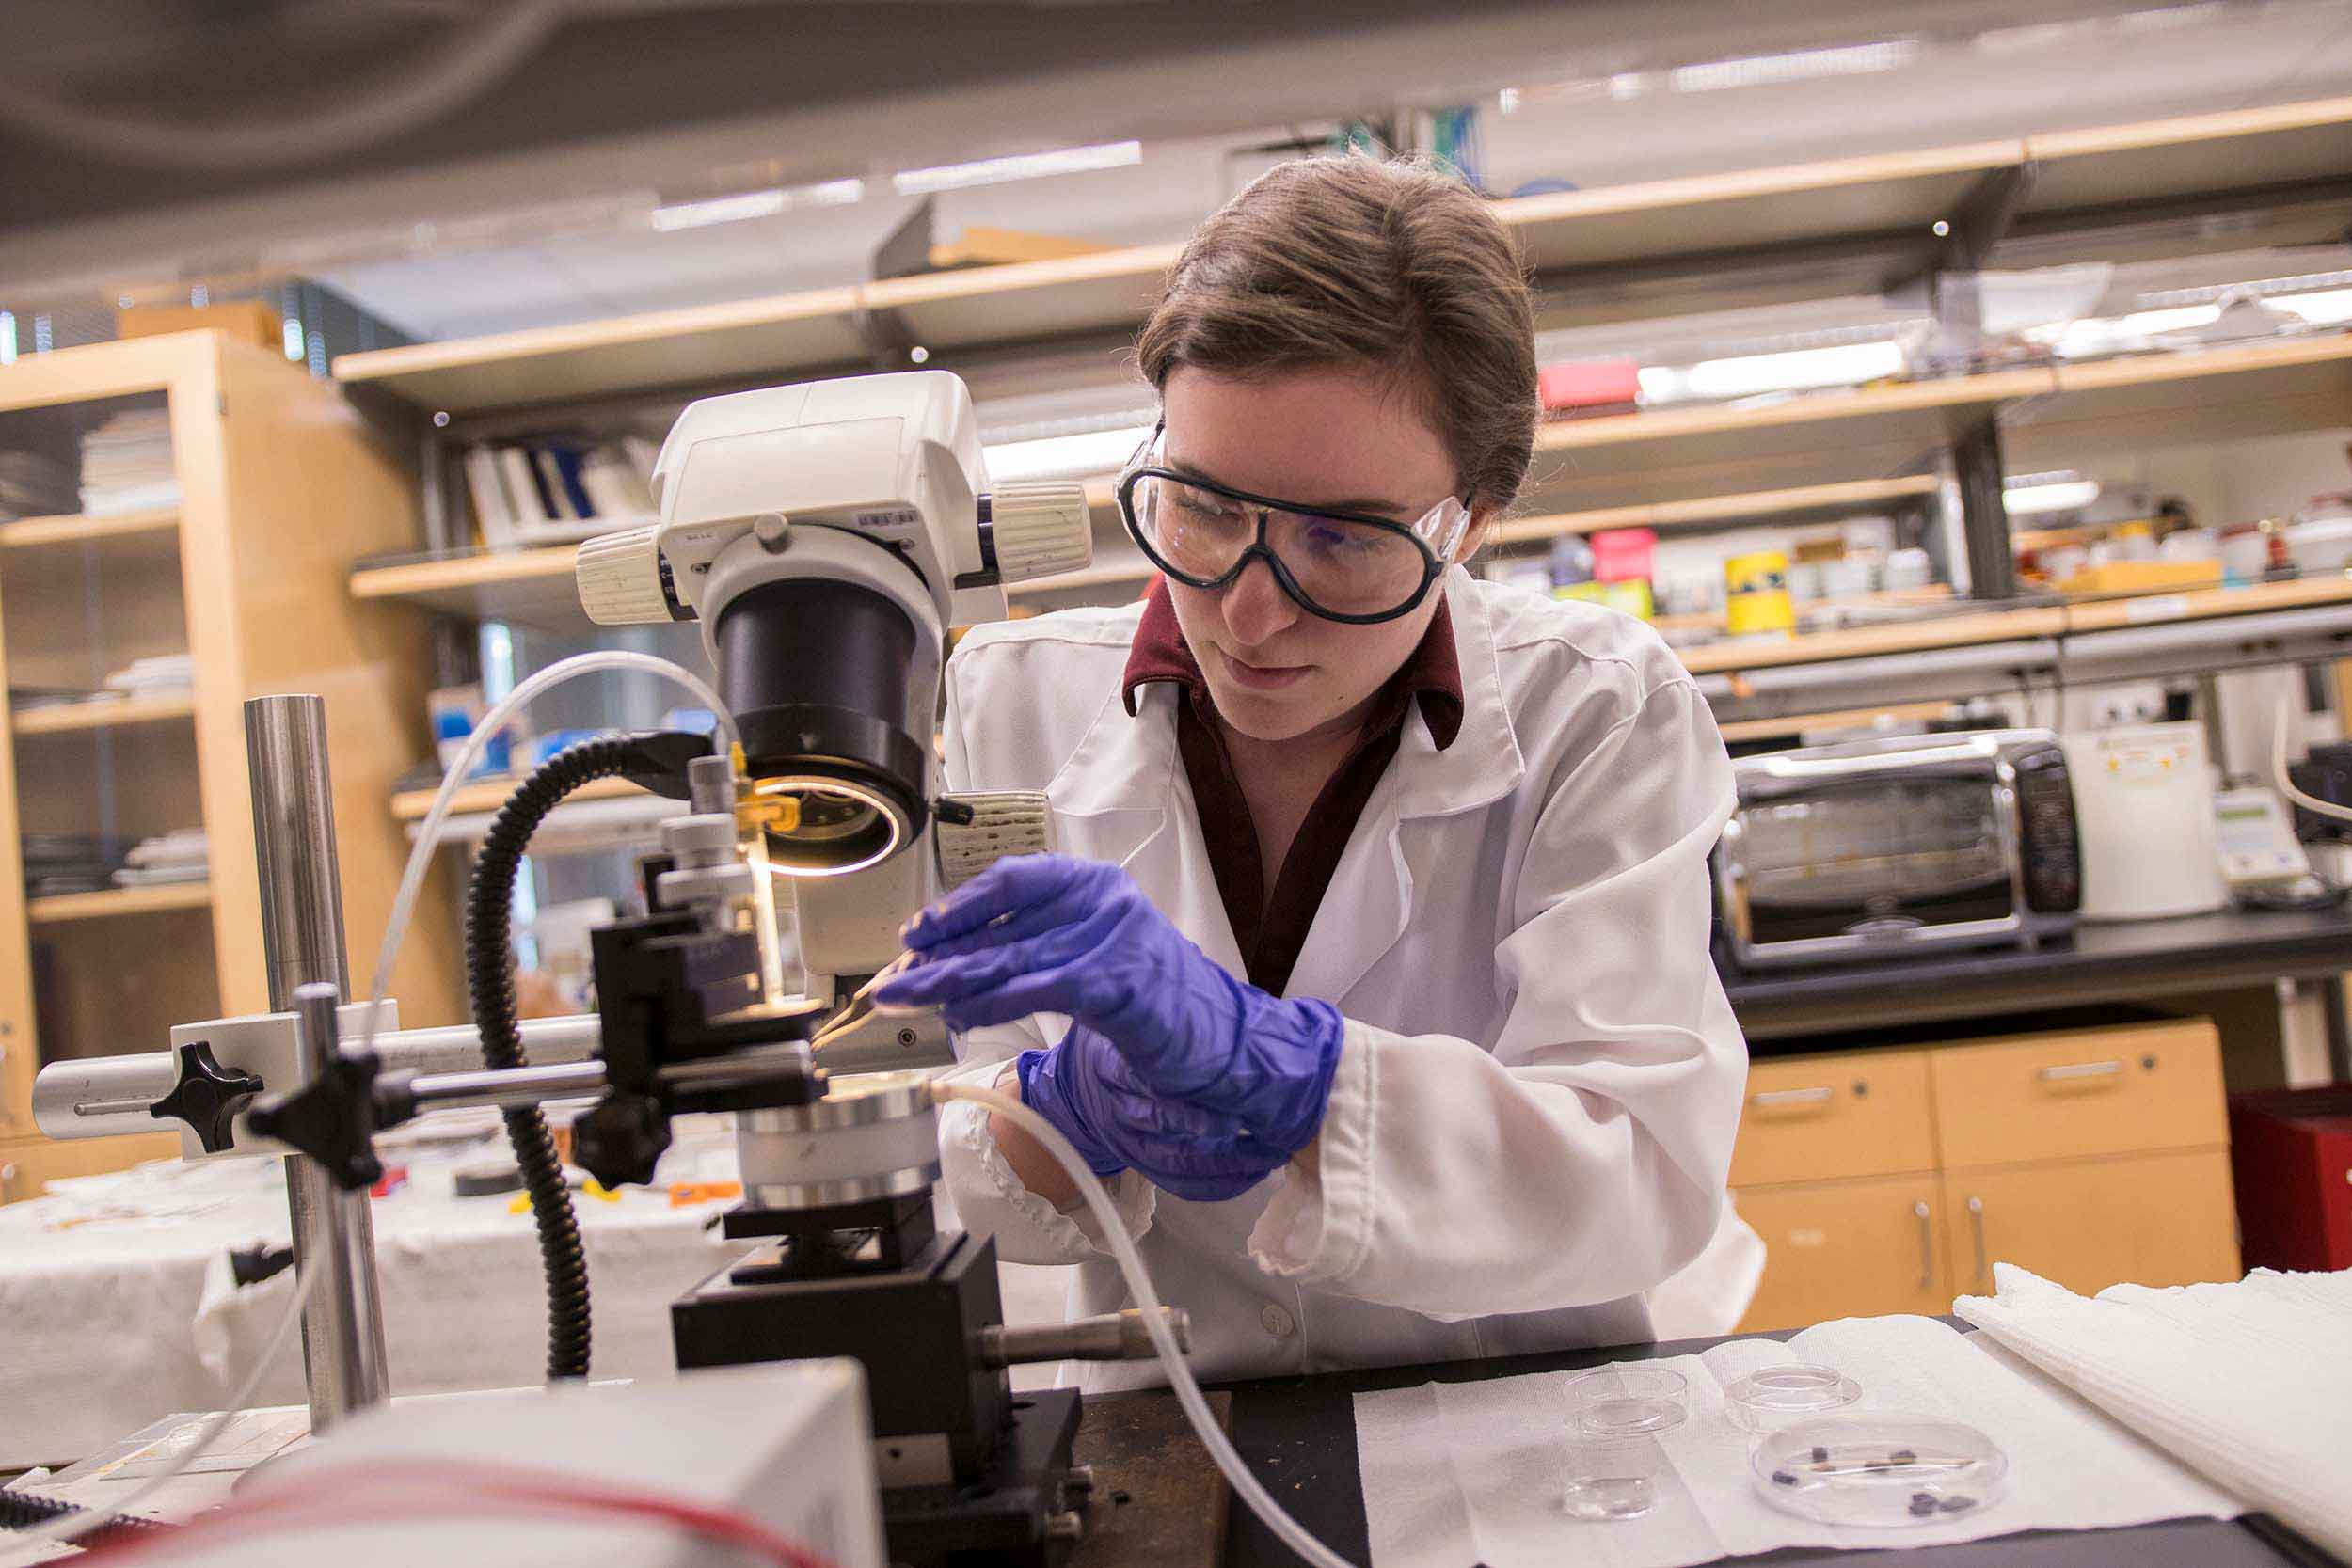 An undergraduate researcher, donning a lab coat, goggle and gloves, performs research at a microscope in a lab